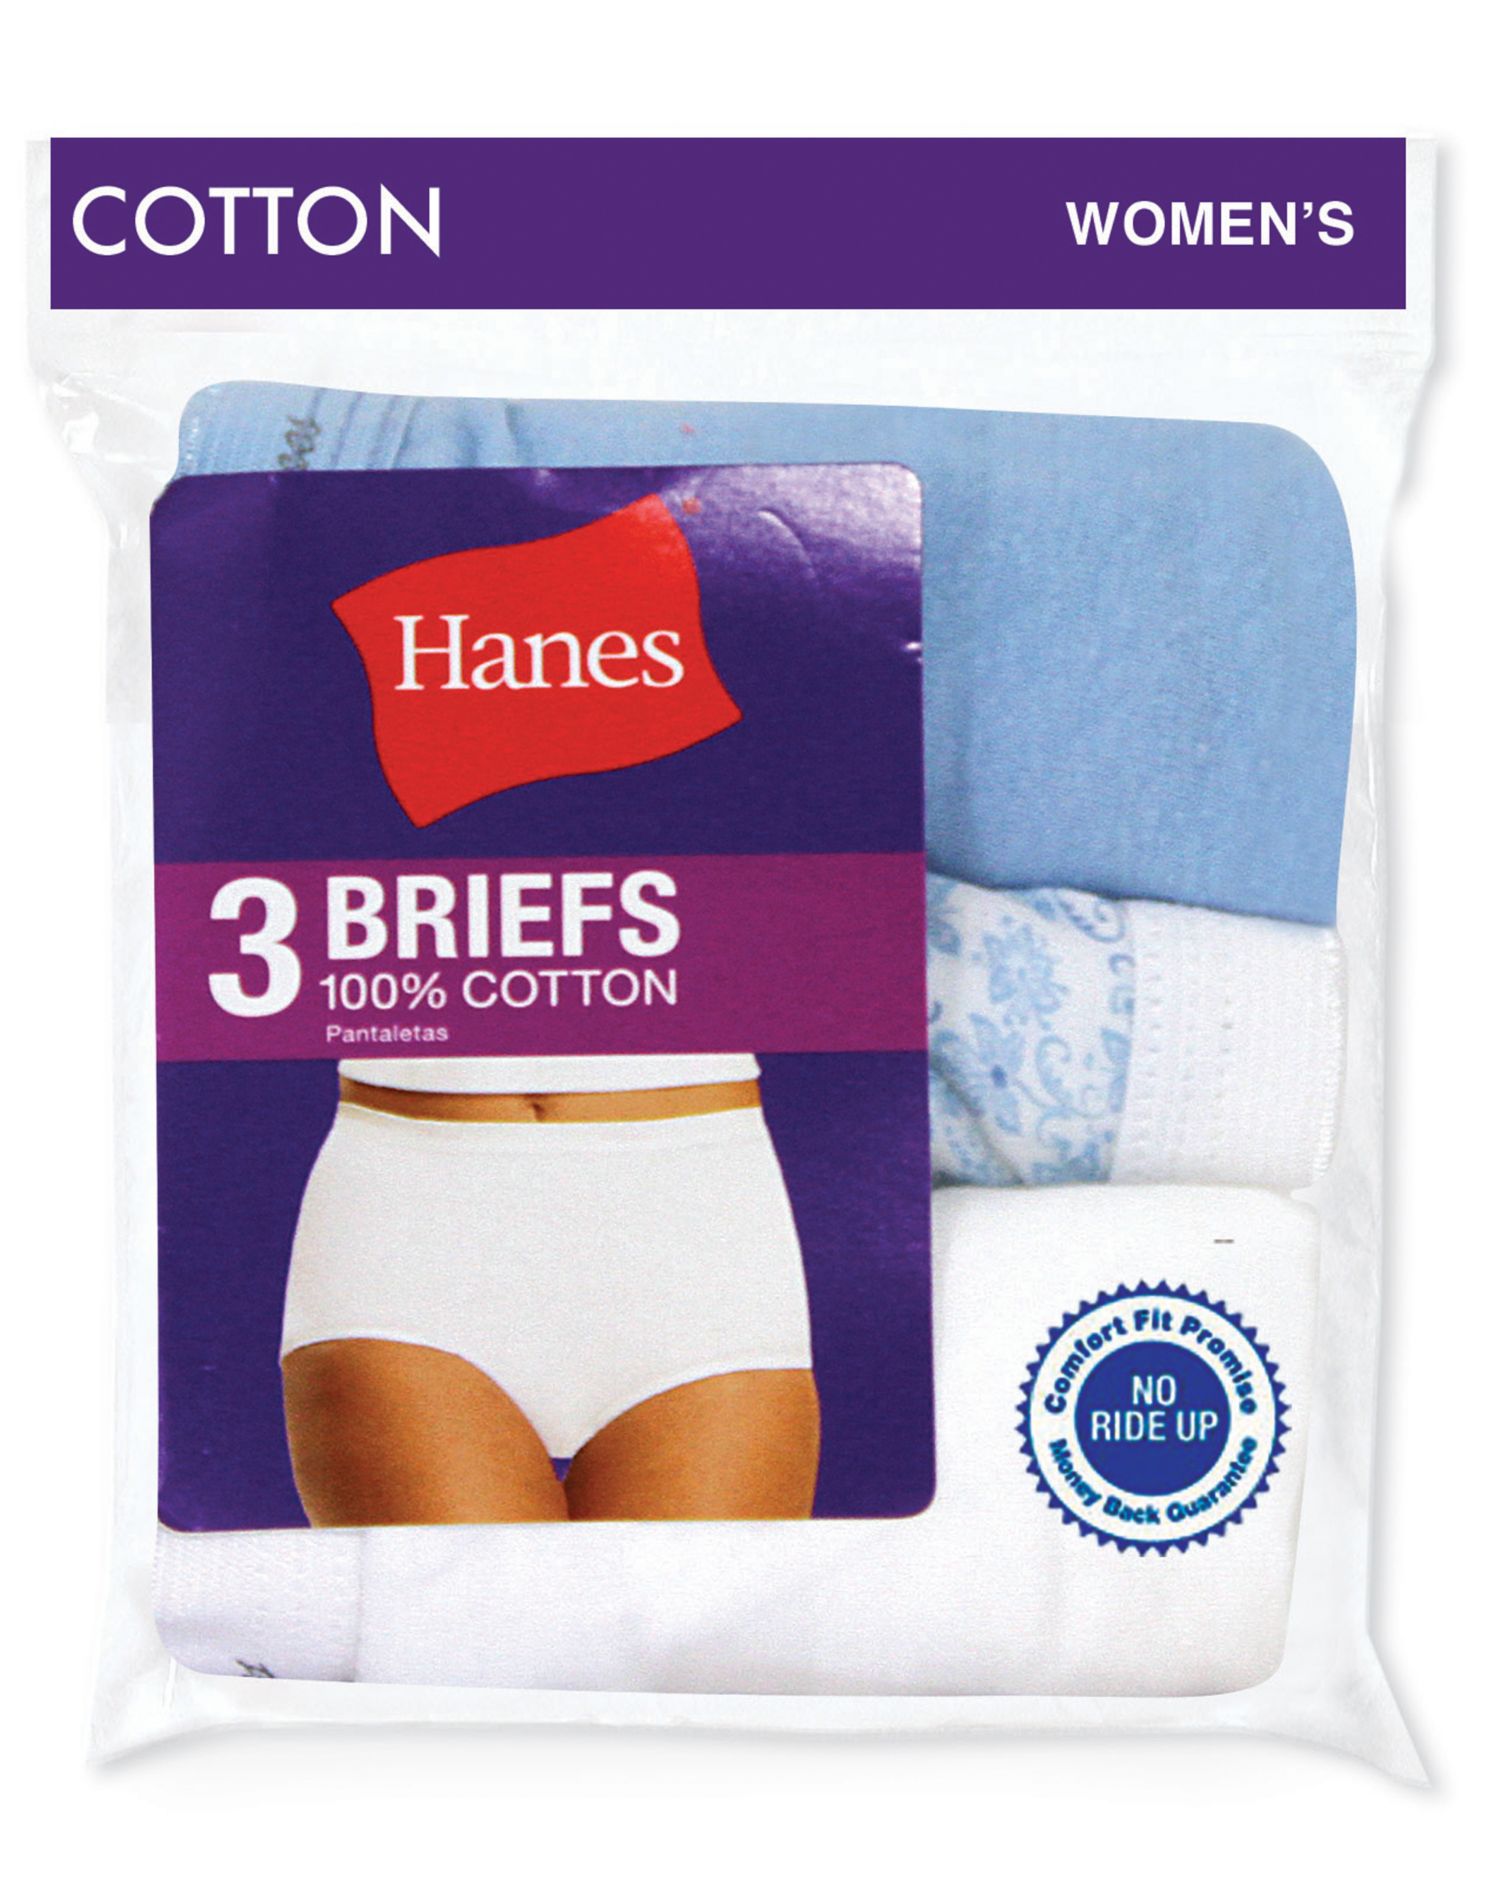 Hanes Womens Cotton Briefs 3-Pack - Apparel Direct Distributor